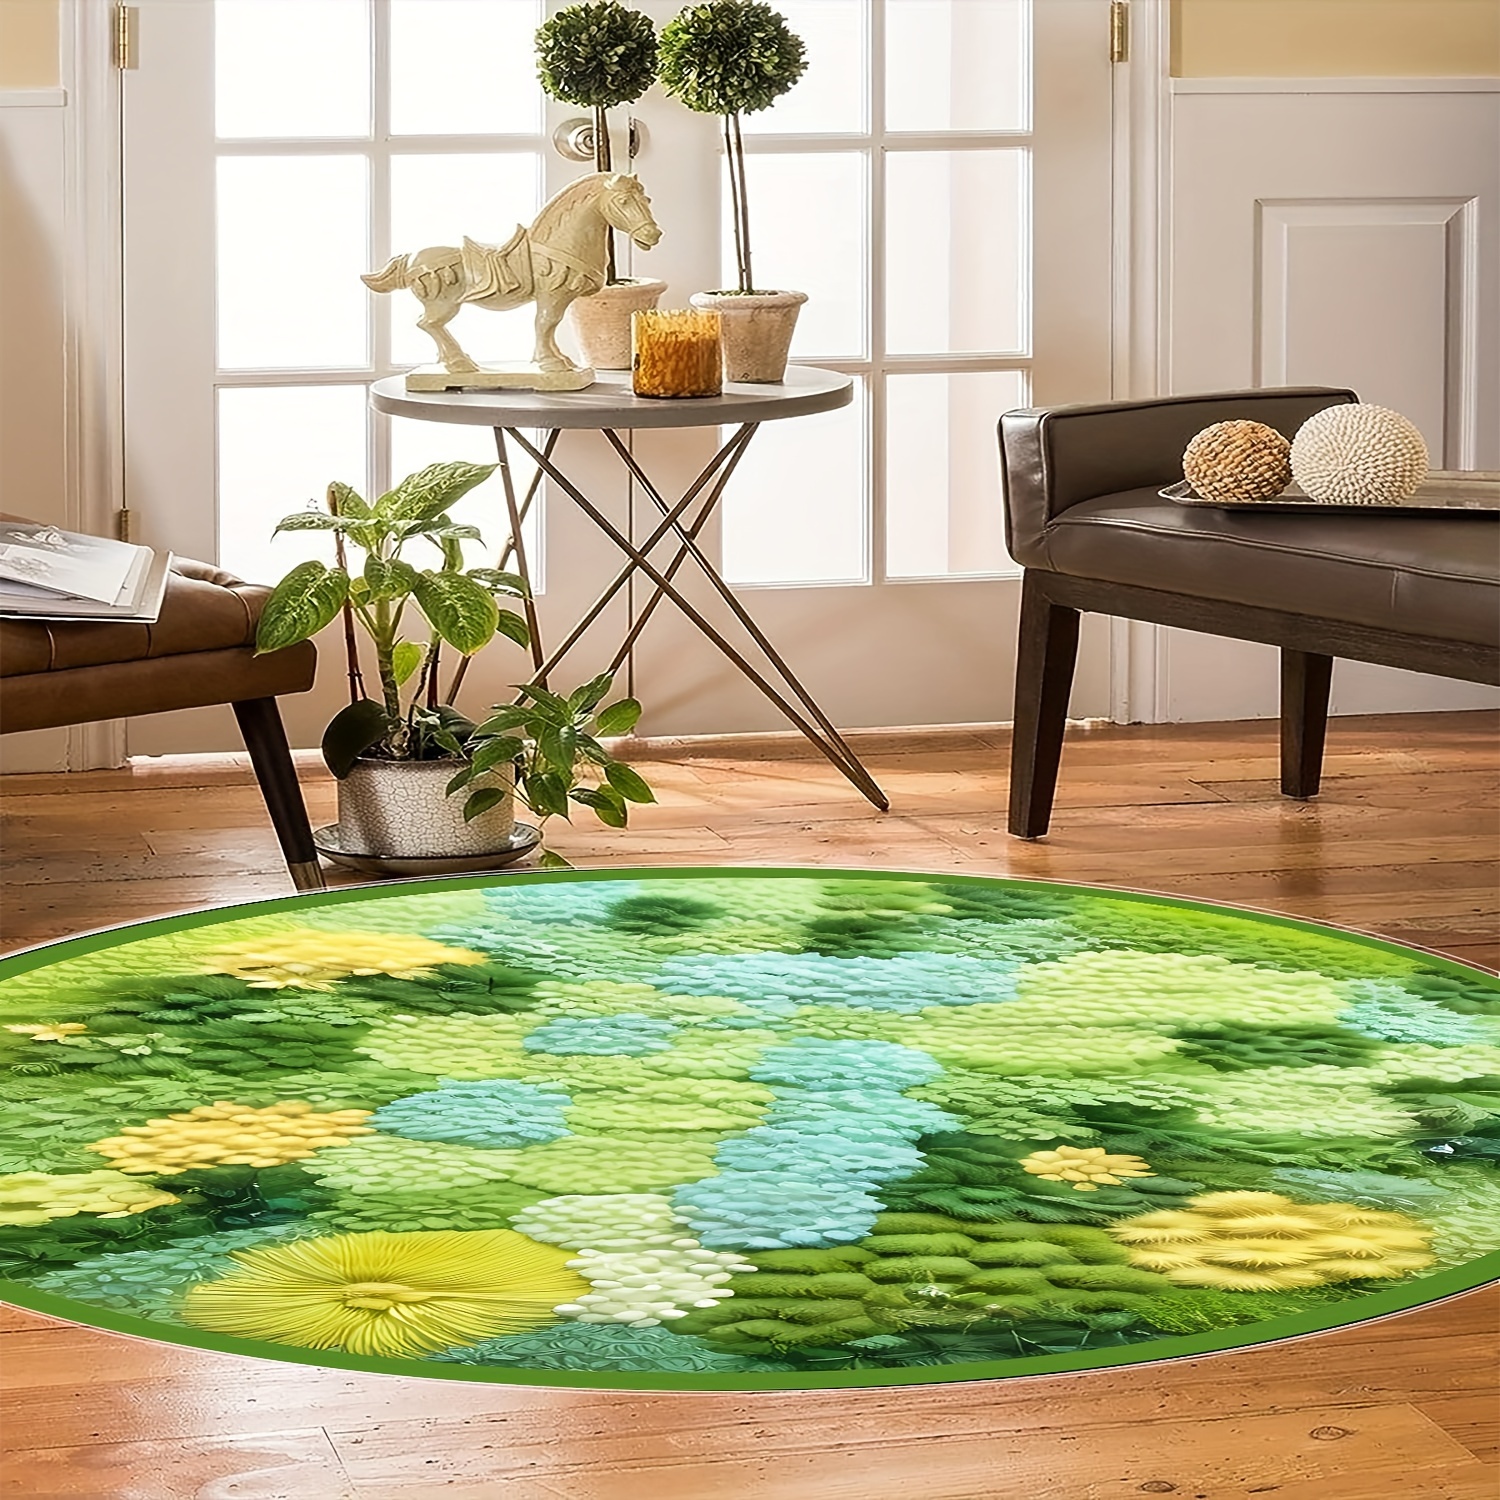 Abstract Contemporary Round Rugs, Modern Area Rugs under Coffee